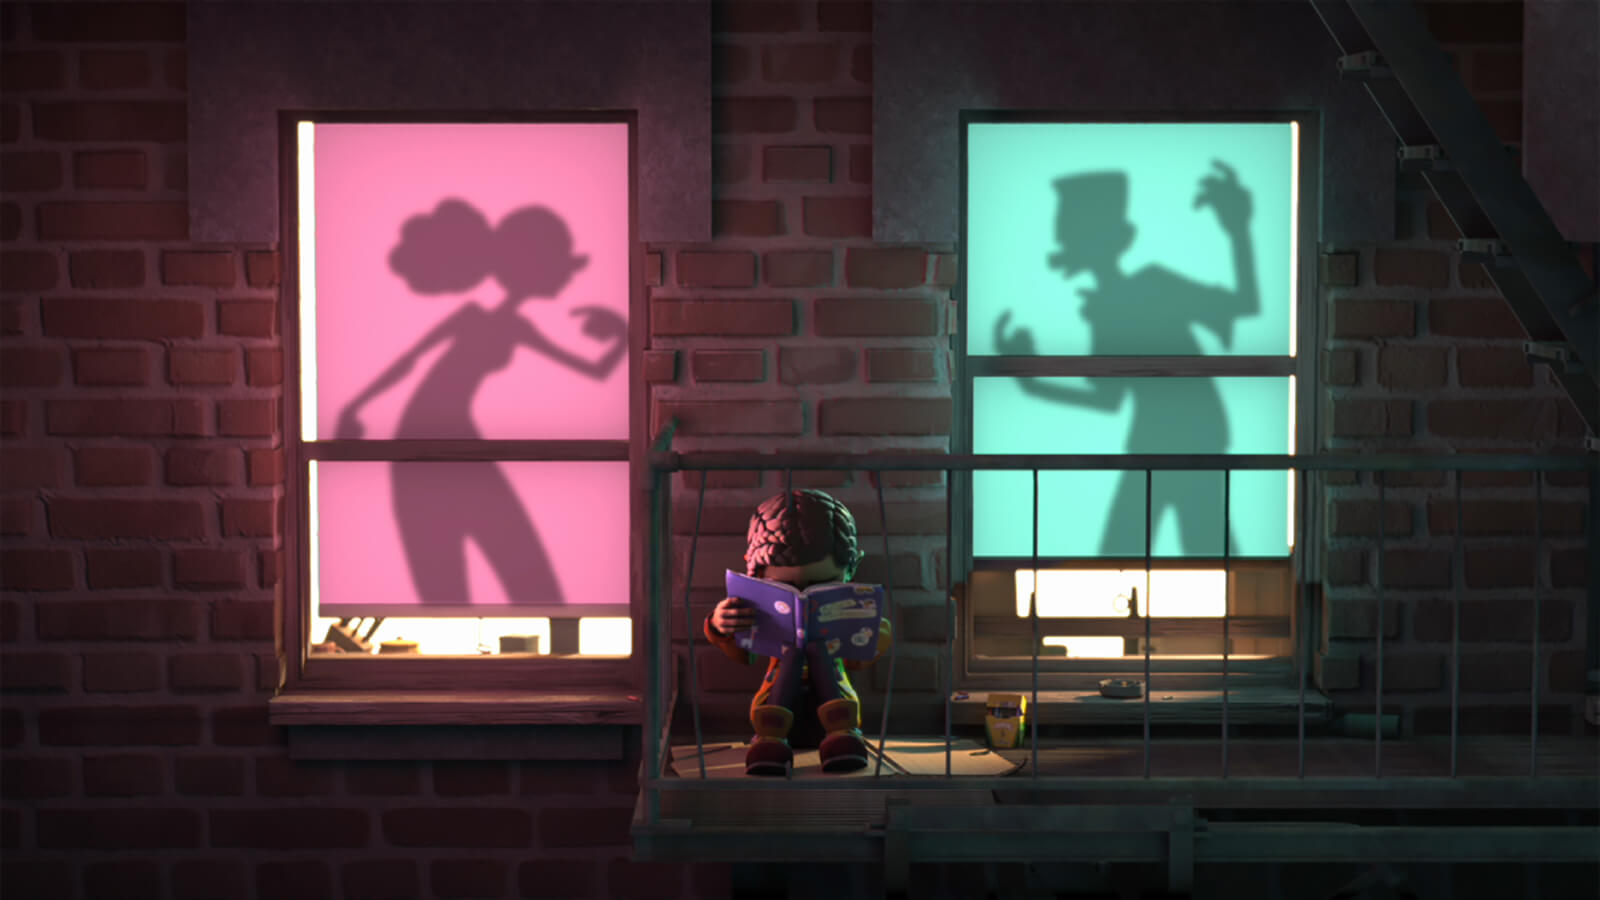 A young girl sits on an apartment fire escape, her head buried in a book, as the silhouettes of two people argue behind her